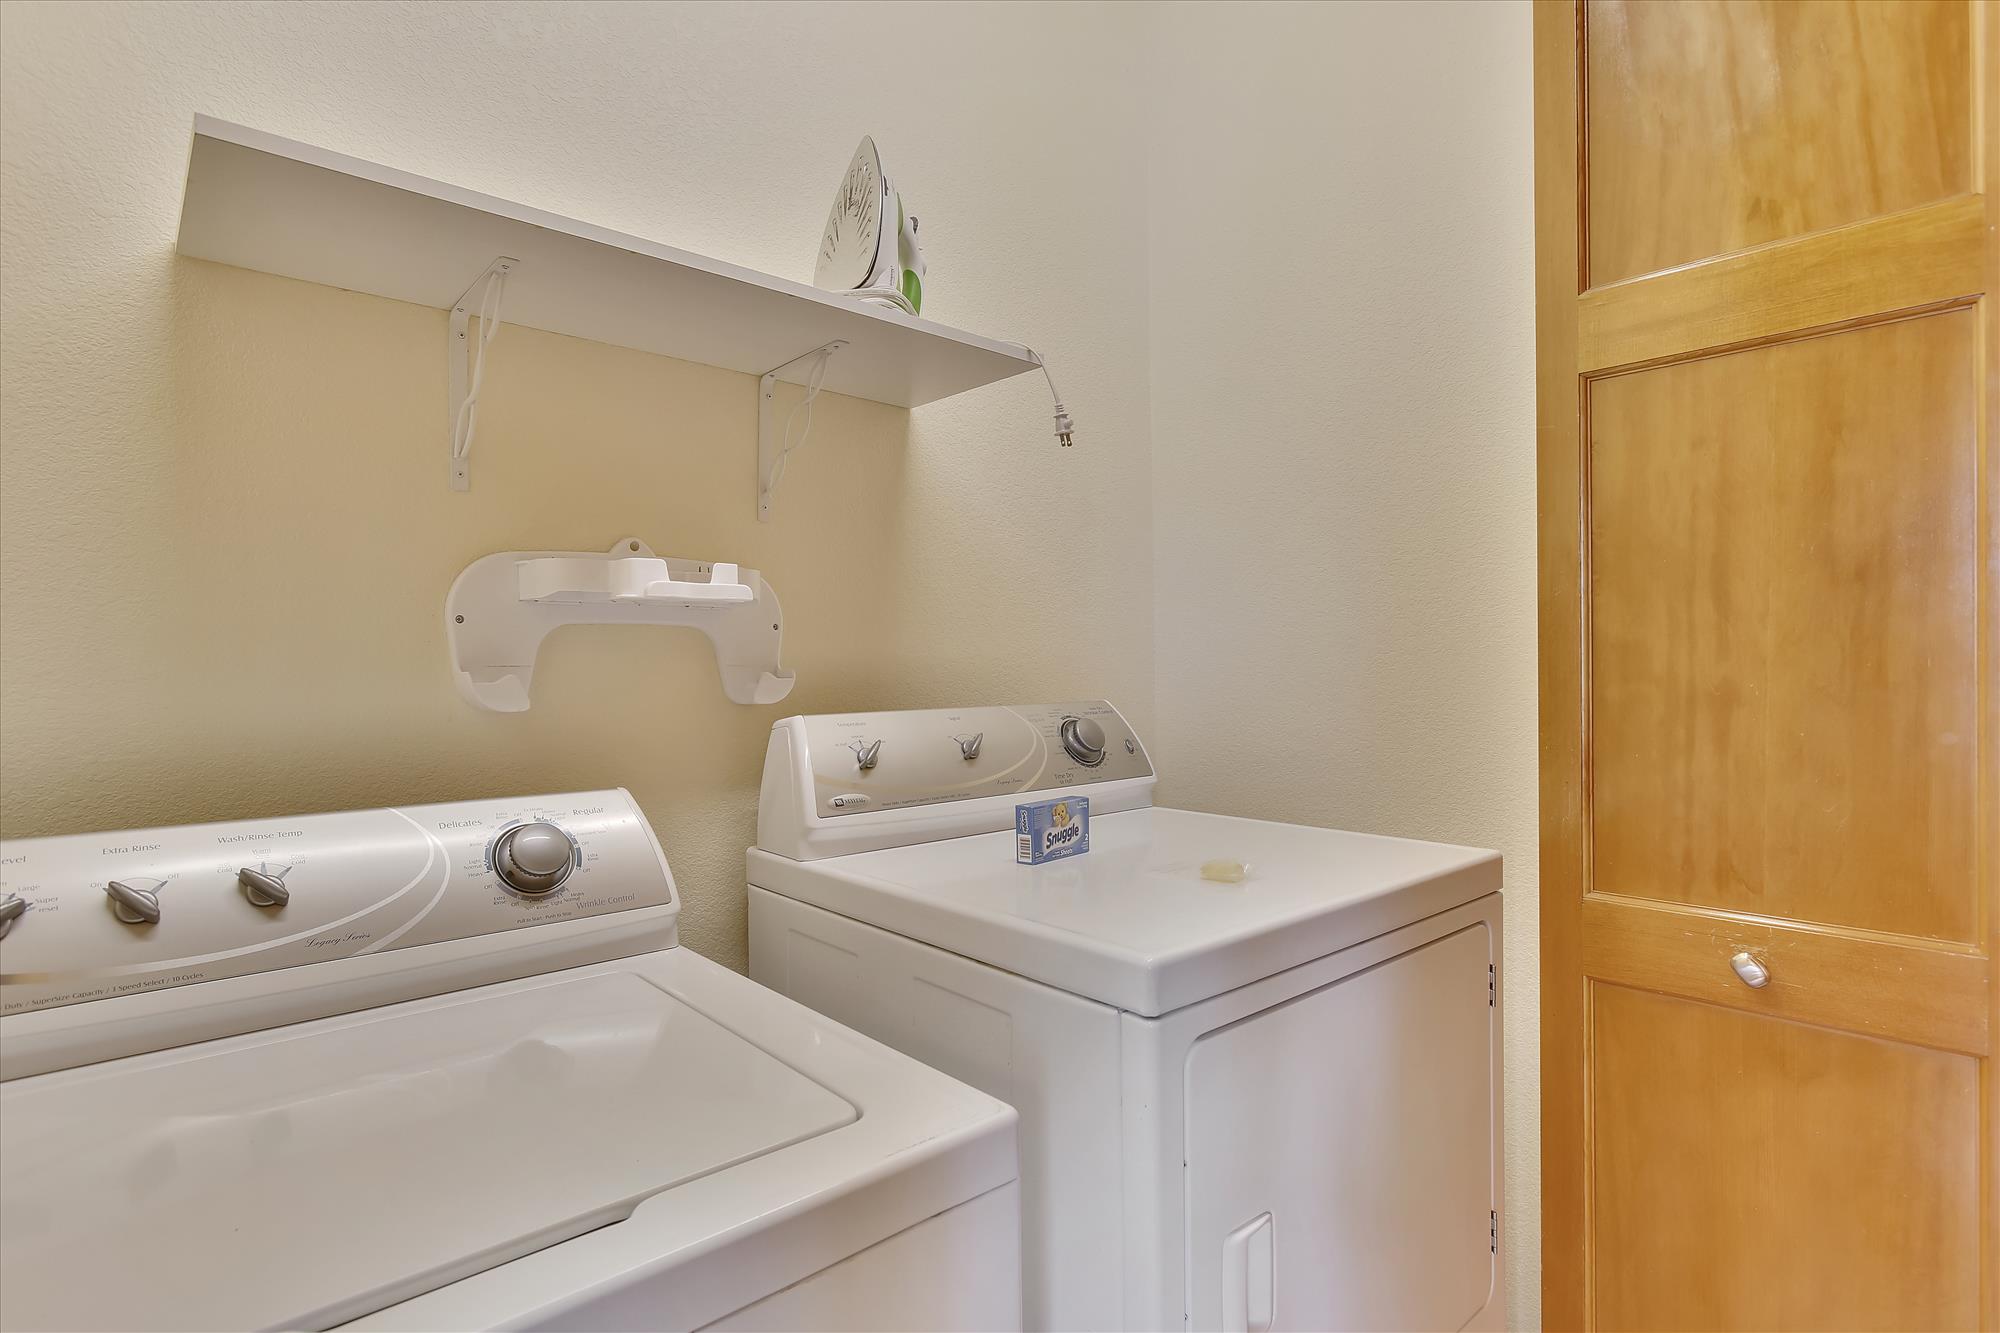 261 Pine St Unit 108, Fort Collins, Colorado, United States 80521, 2 Bedrooms Bedrooms, ,2.5 BathroomsBathrooms,Condo,Furnished,Pine St Unit 108,1045